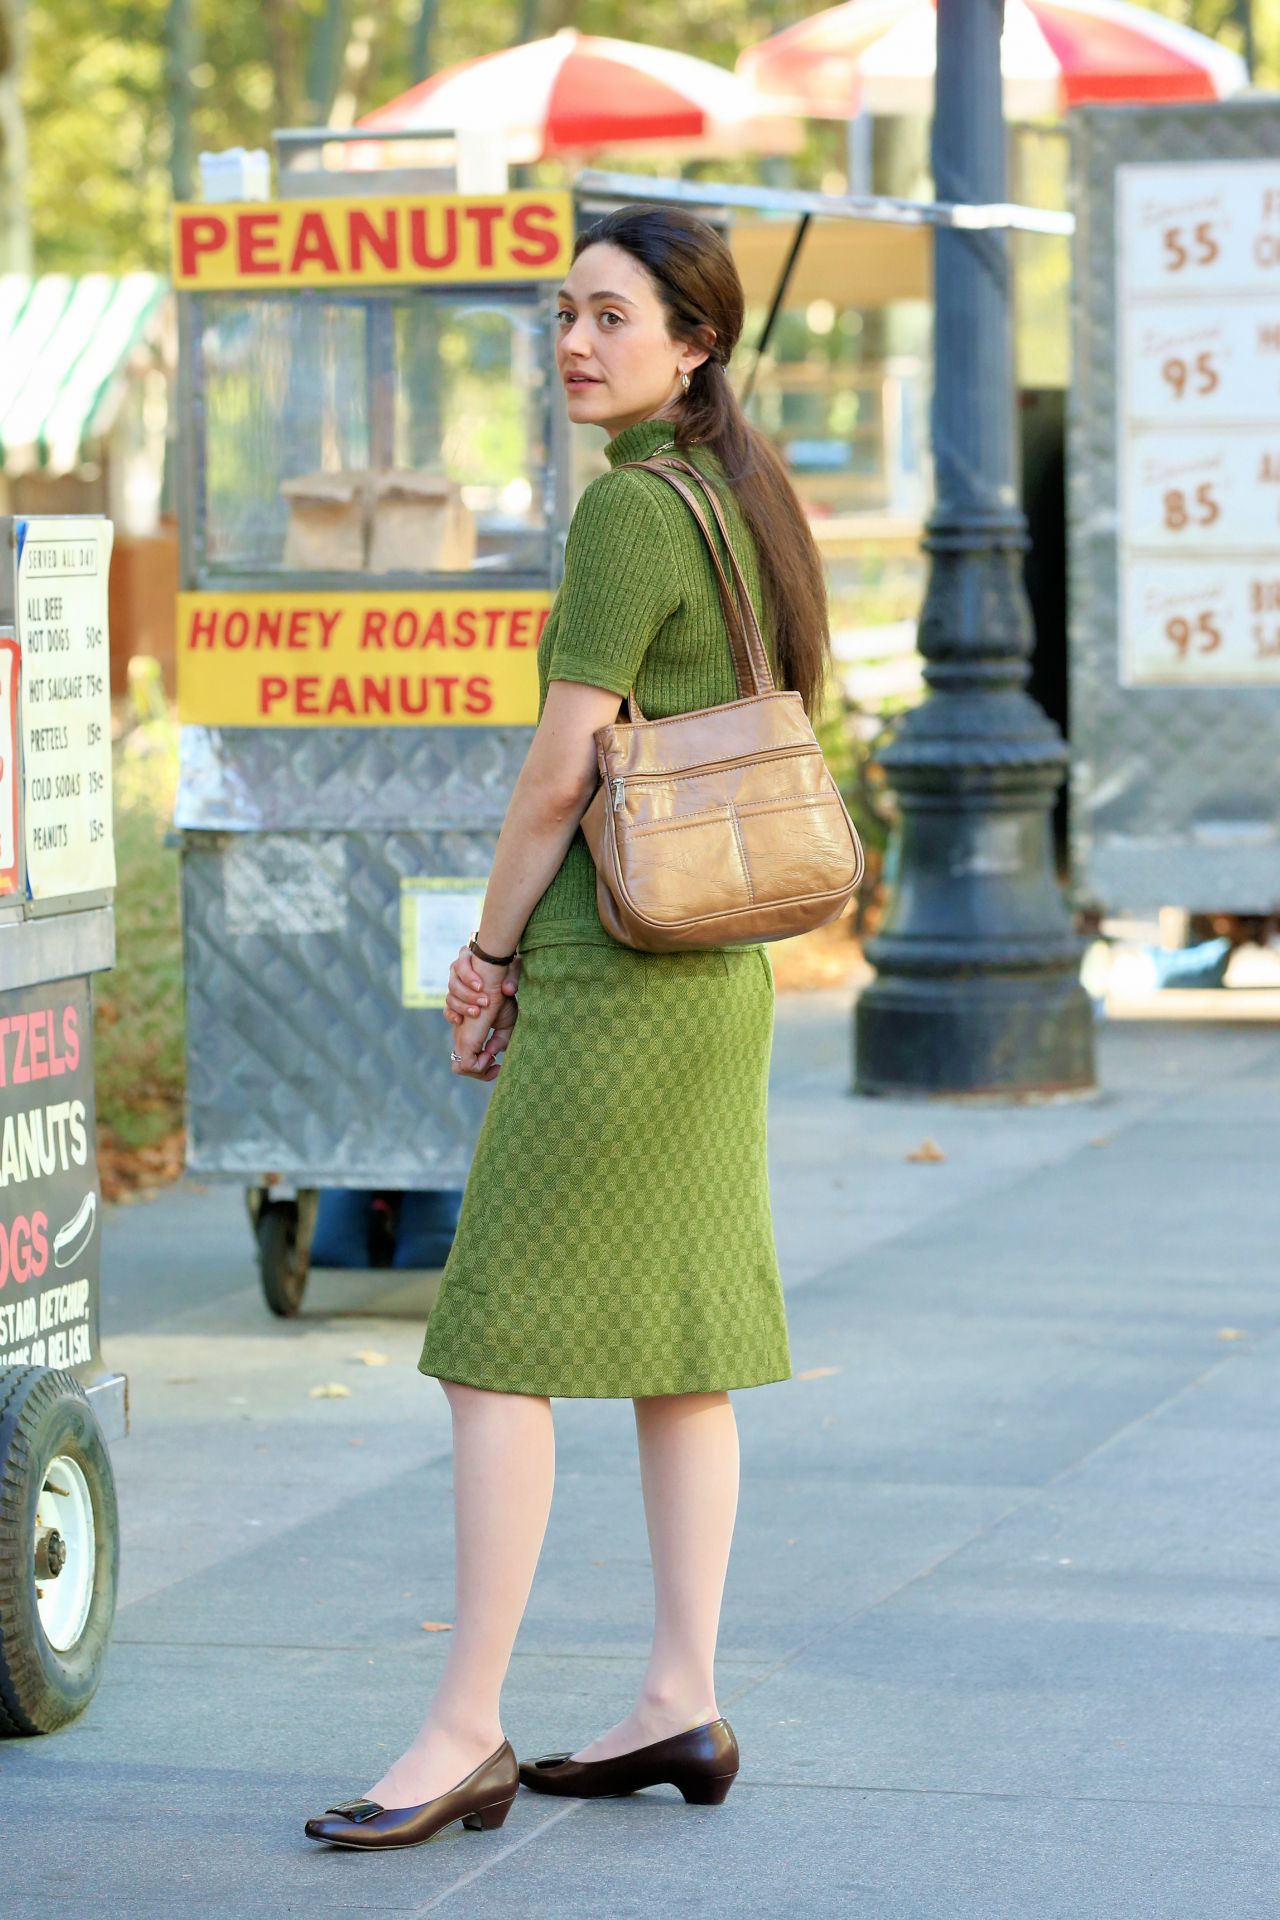 Emmy Rossum - "The Crowded Room" Set in New York City 08/03/2022.